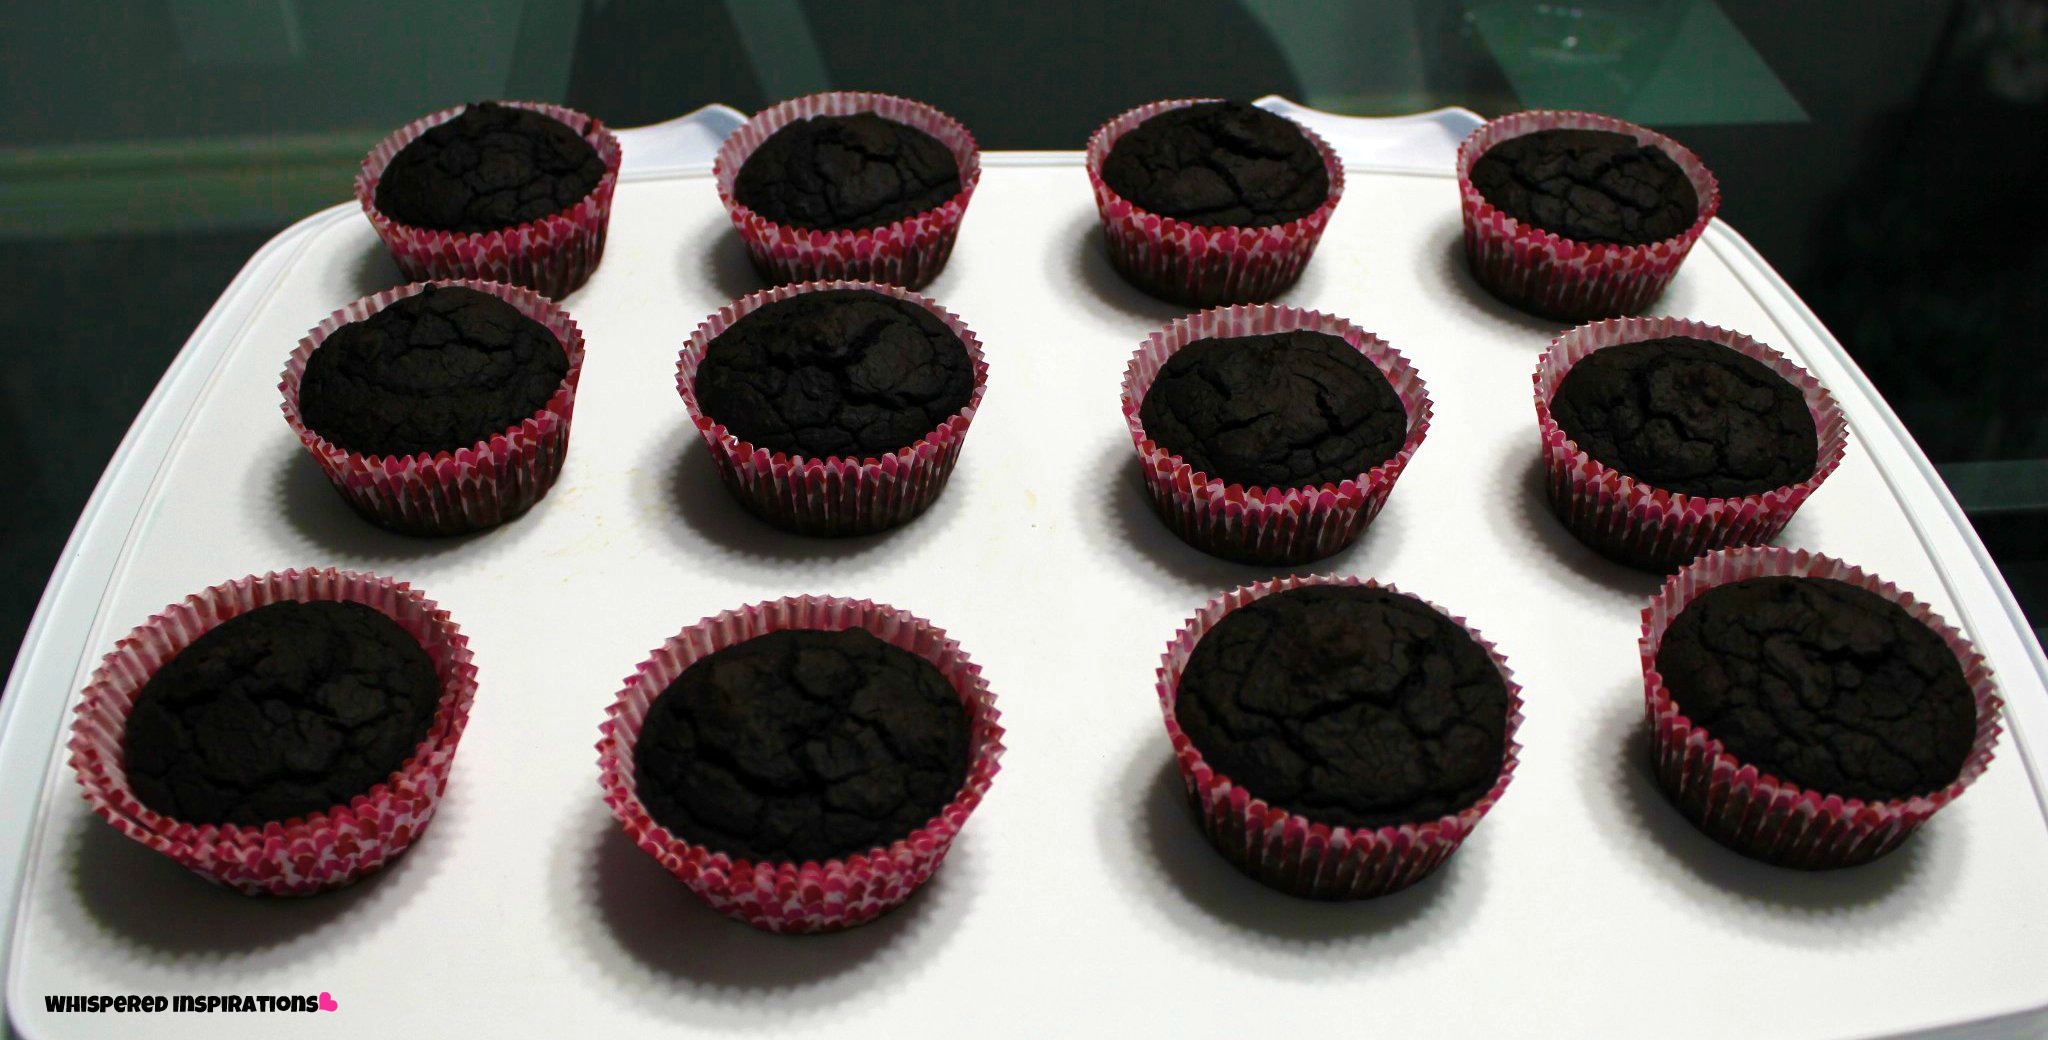 Chocolate cupcakes cooling on a tray.